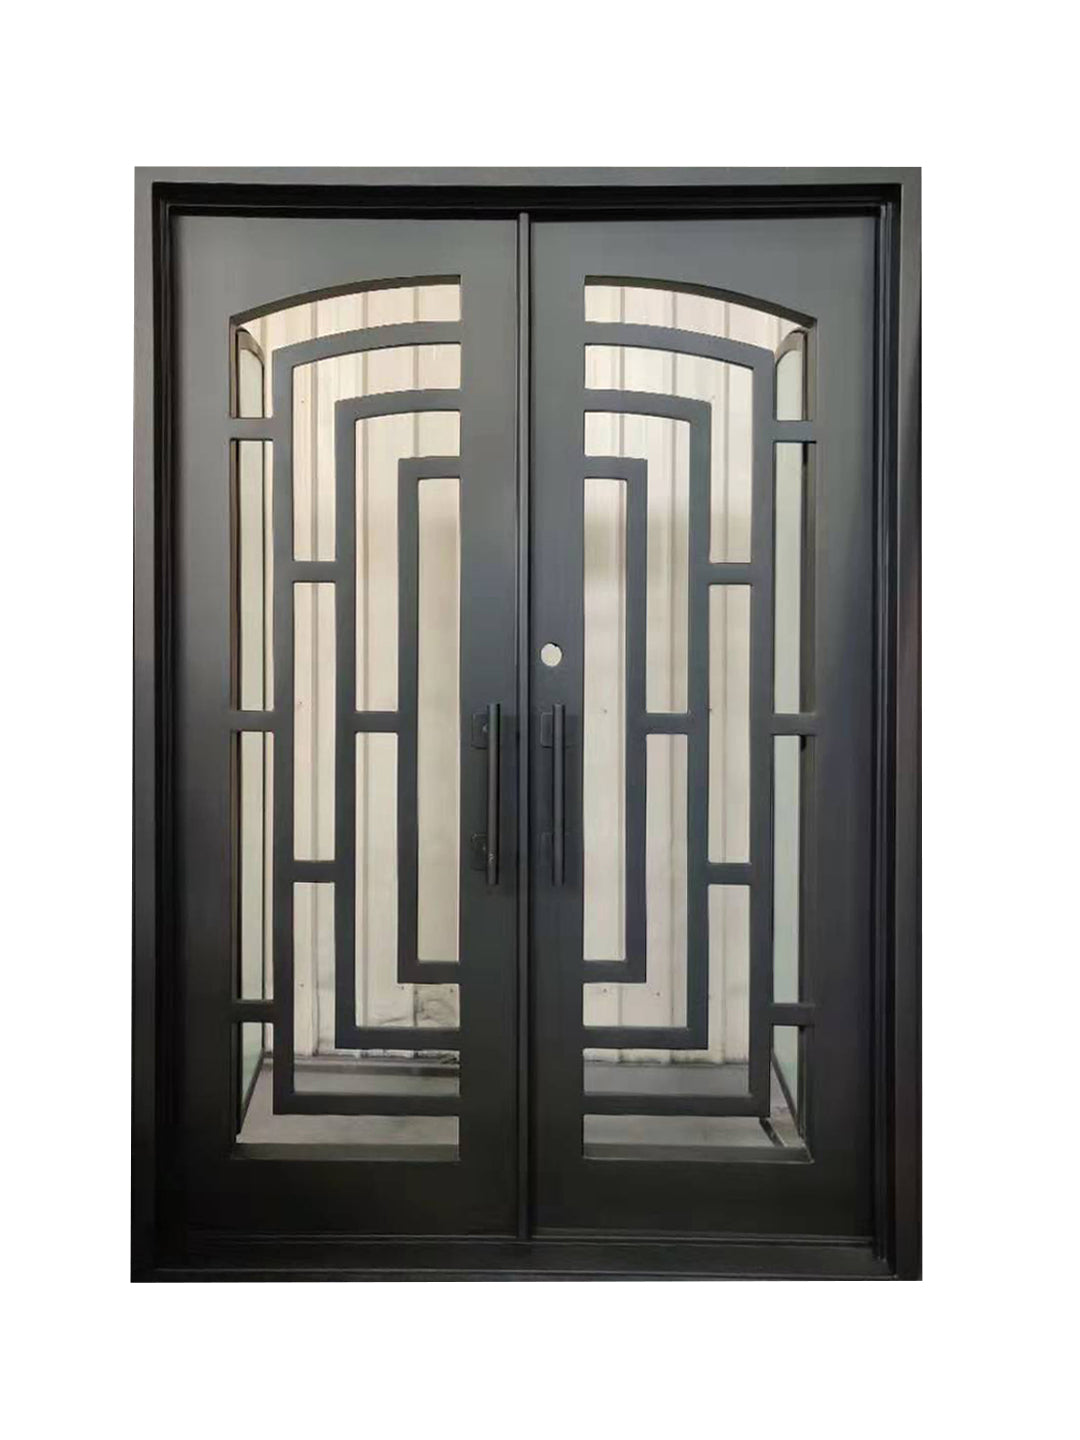 Belton Model Double Front Entry Iron Door With Tempered Frosted Glass Dark Bronze Finish - AAWAIZ IMPORTS